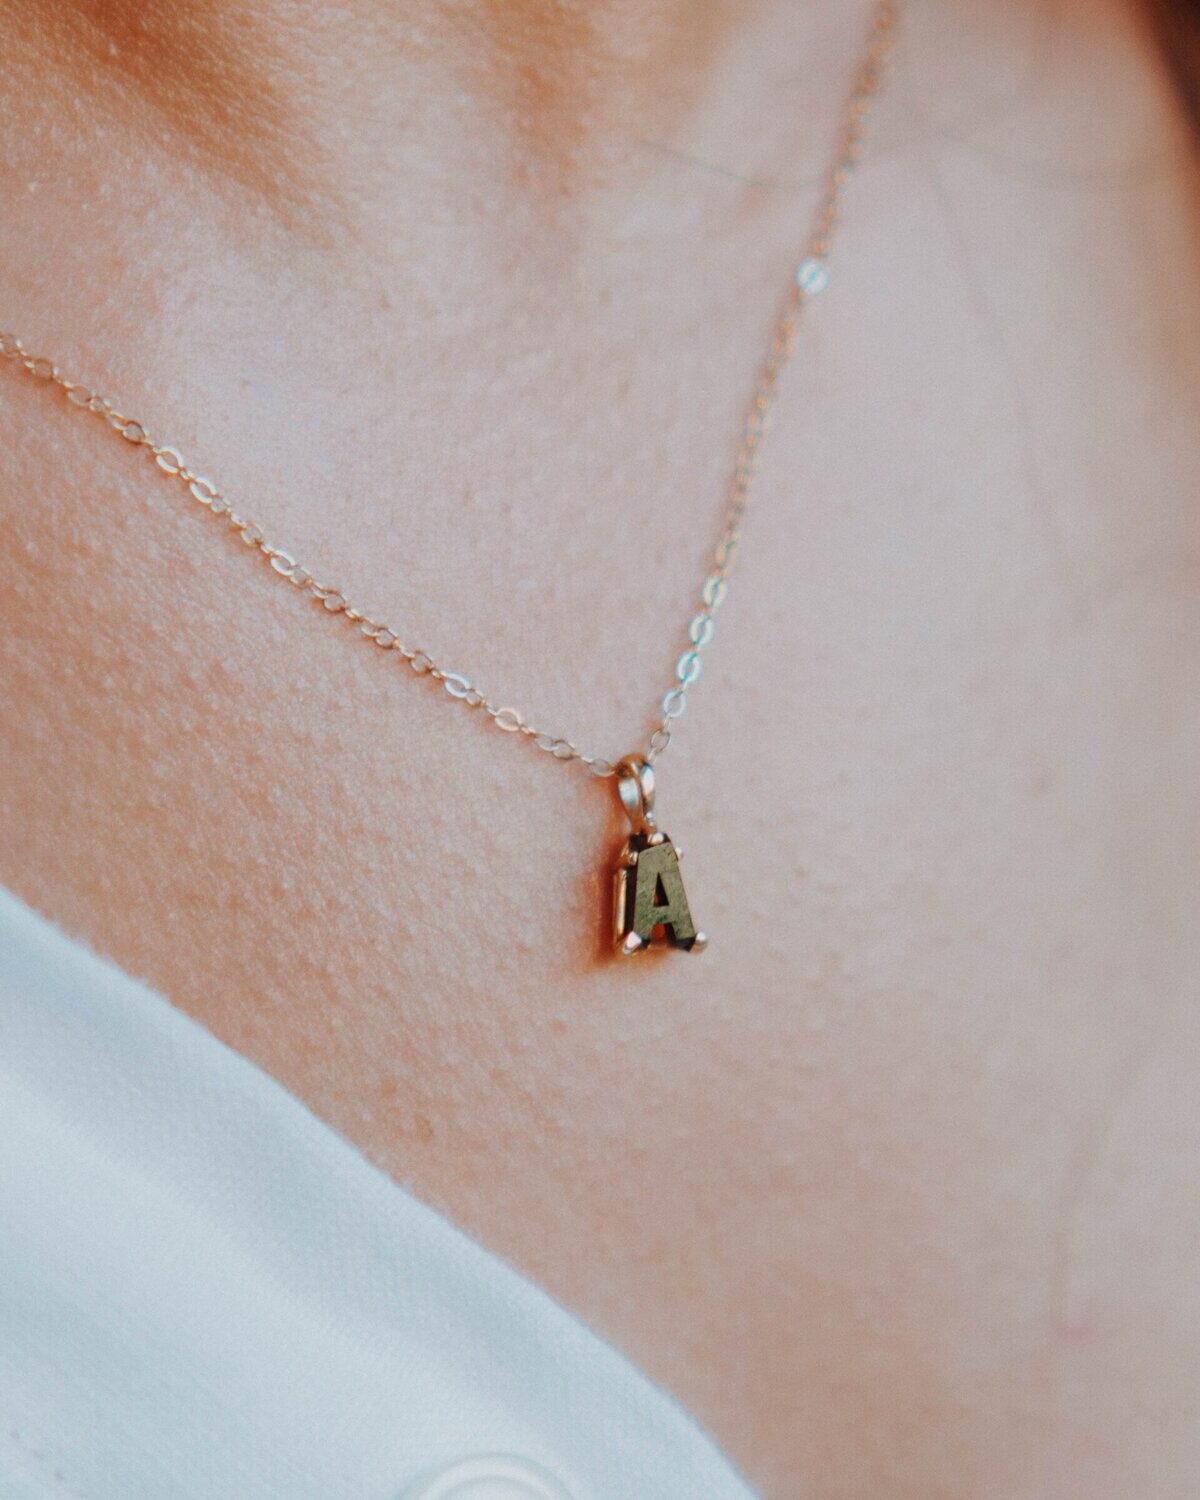 Own Your Initial Necklace